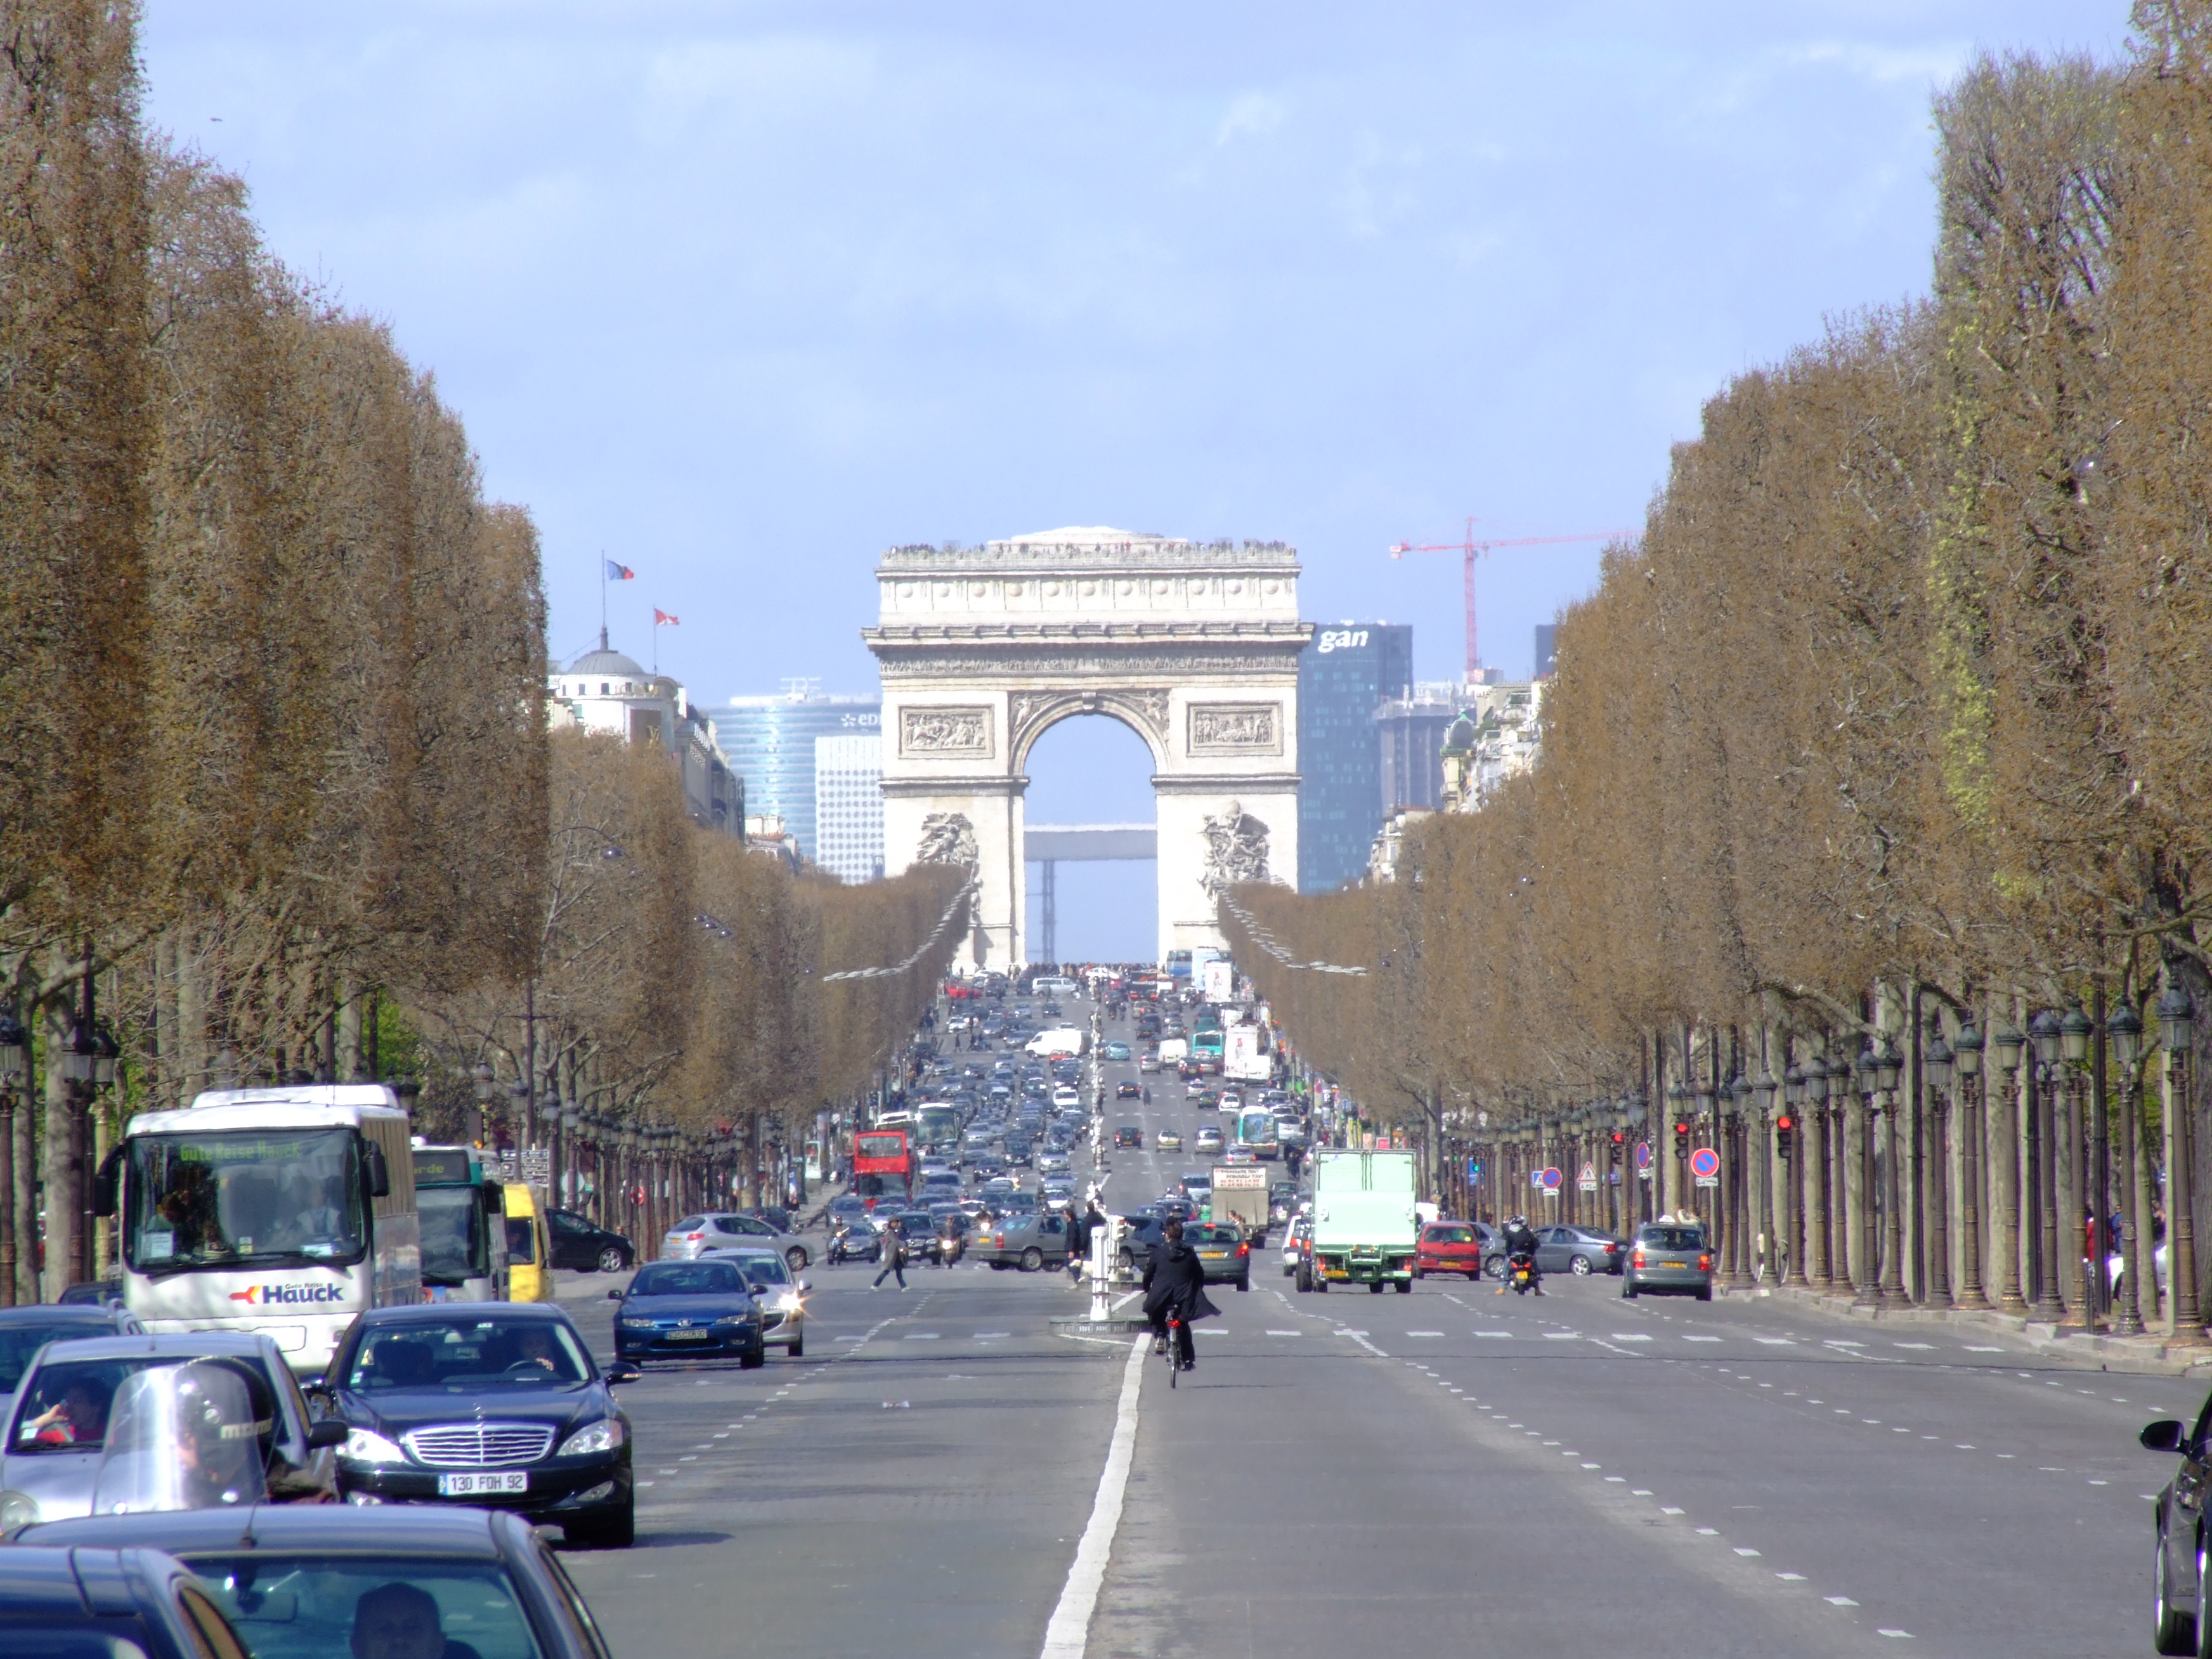 File:Arc de Triomphe from Avenue des Champs Elysees with trees.JPG -  Wikimedia Commons